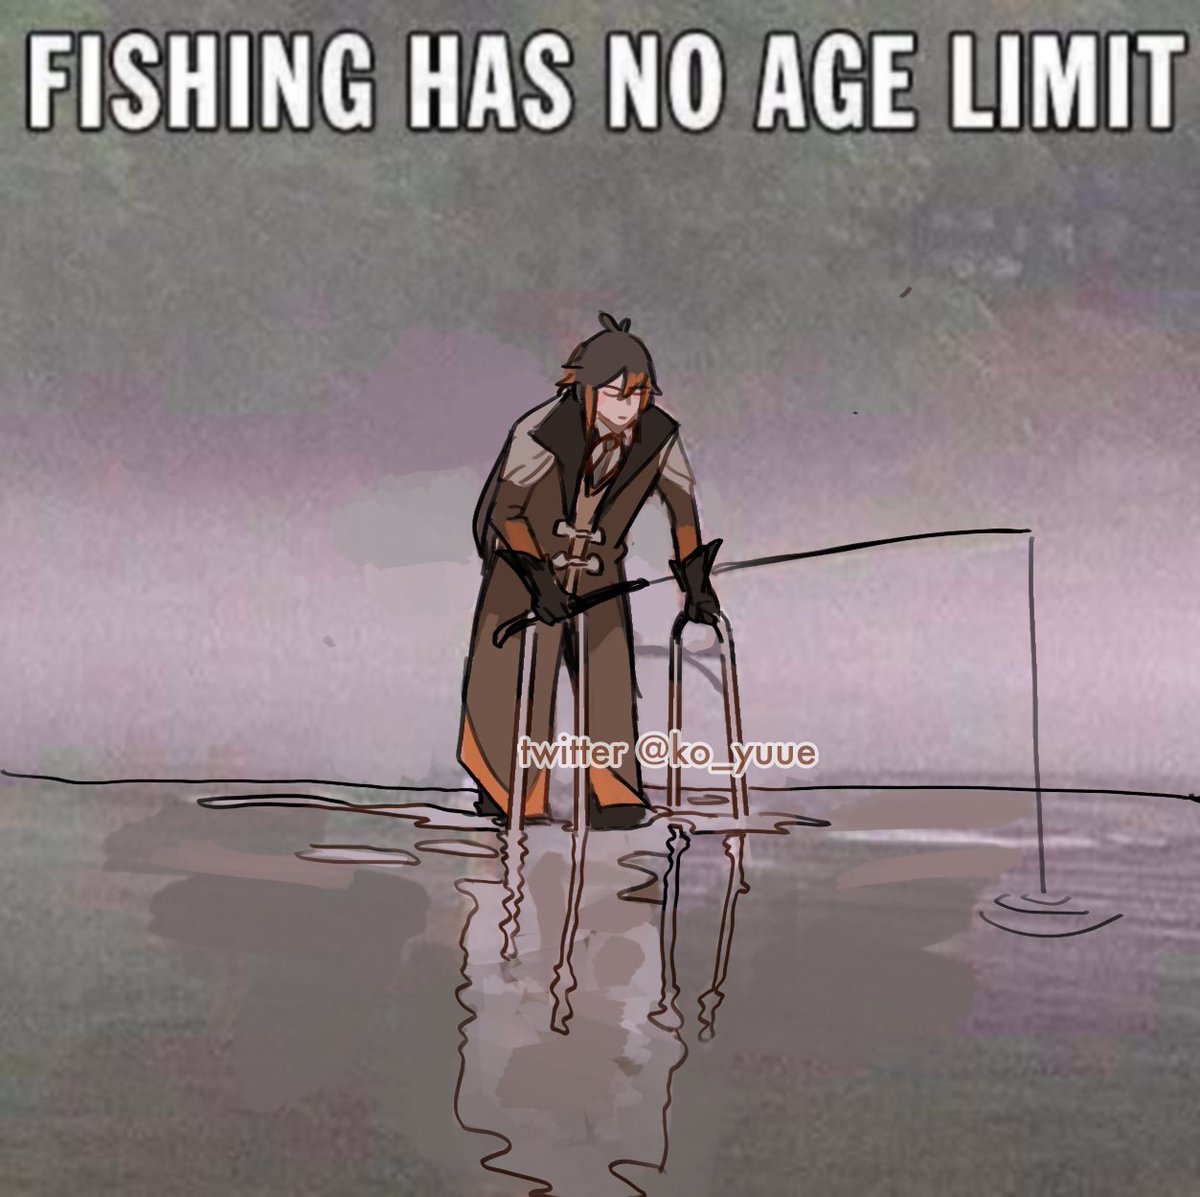 #GenshinImpact #原神 
fishing memes to commemorate fishing event (please give me the catch alrdy) 